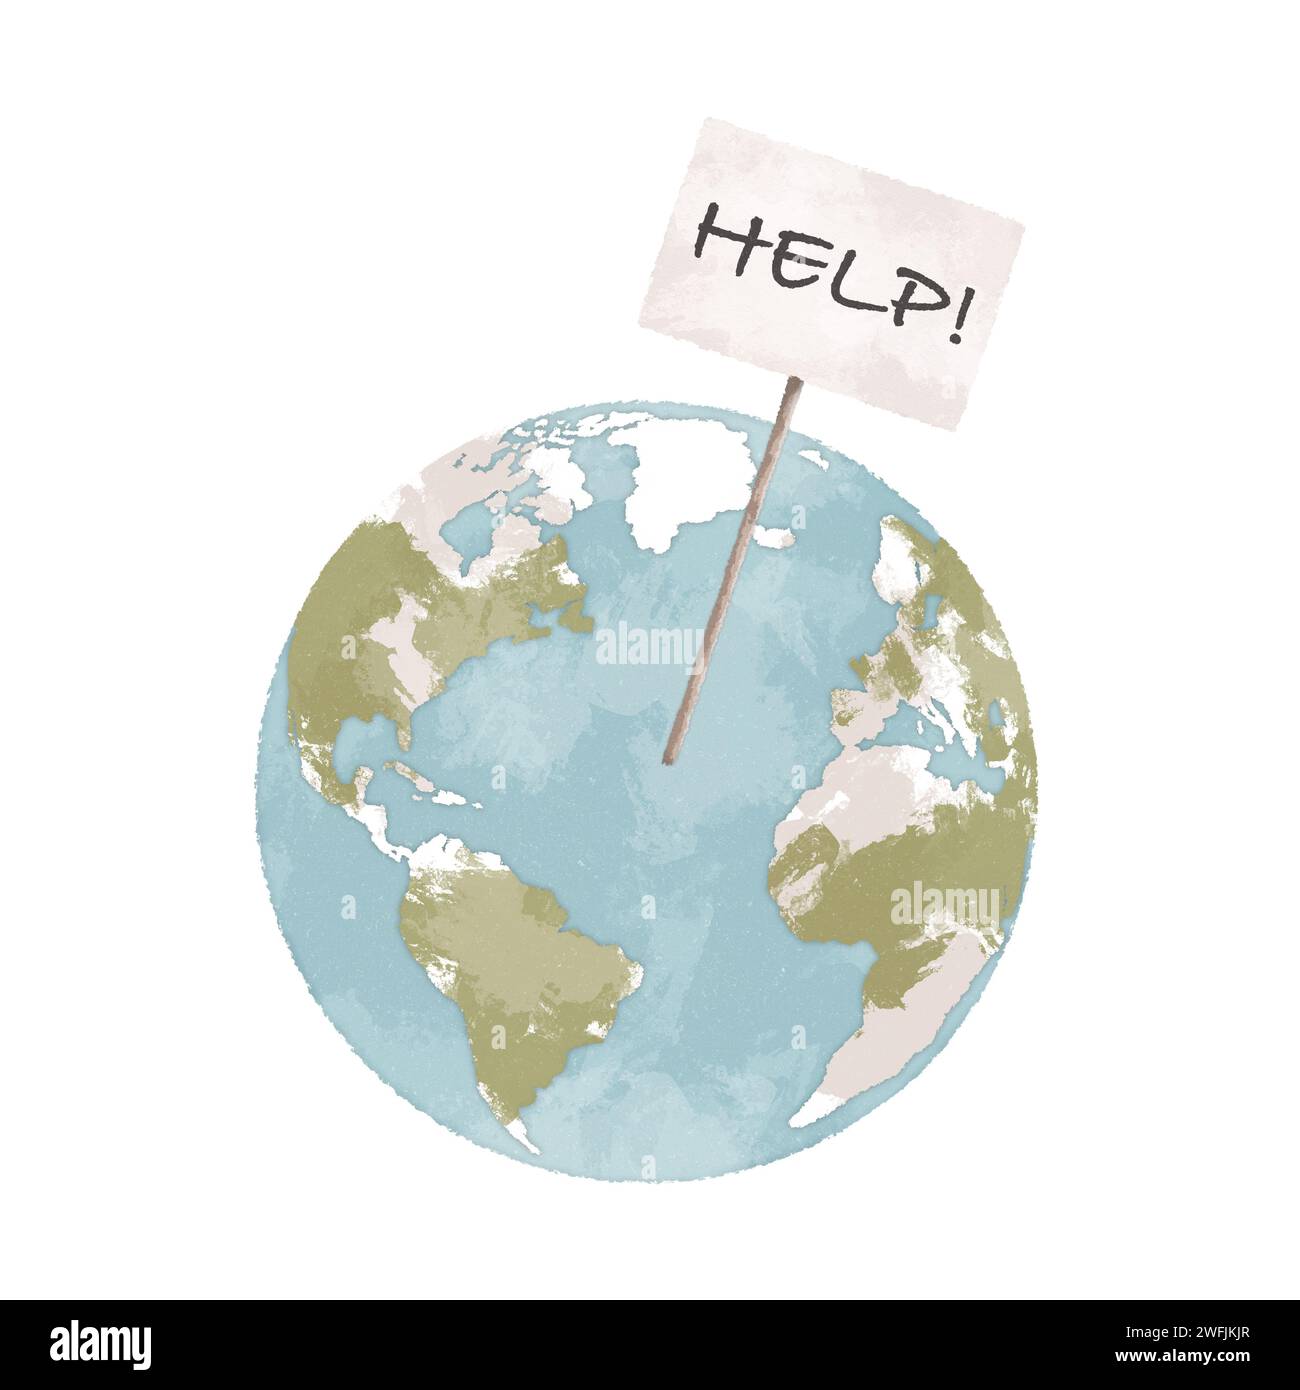 Planet Earth with help sign hand drawn illustration. Climate change concept. Global warming art. Environmental challenges concept art Stock Photo